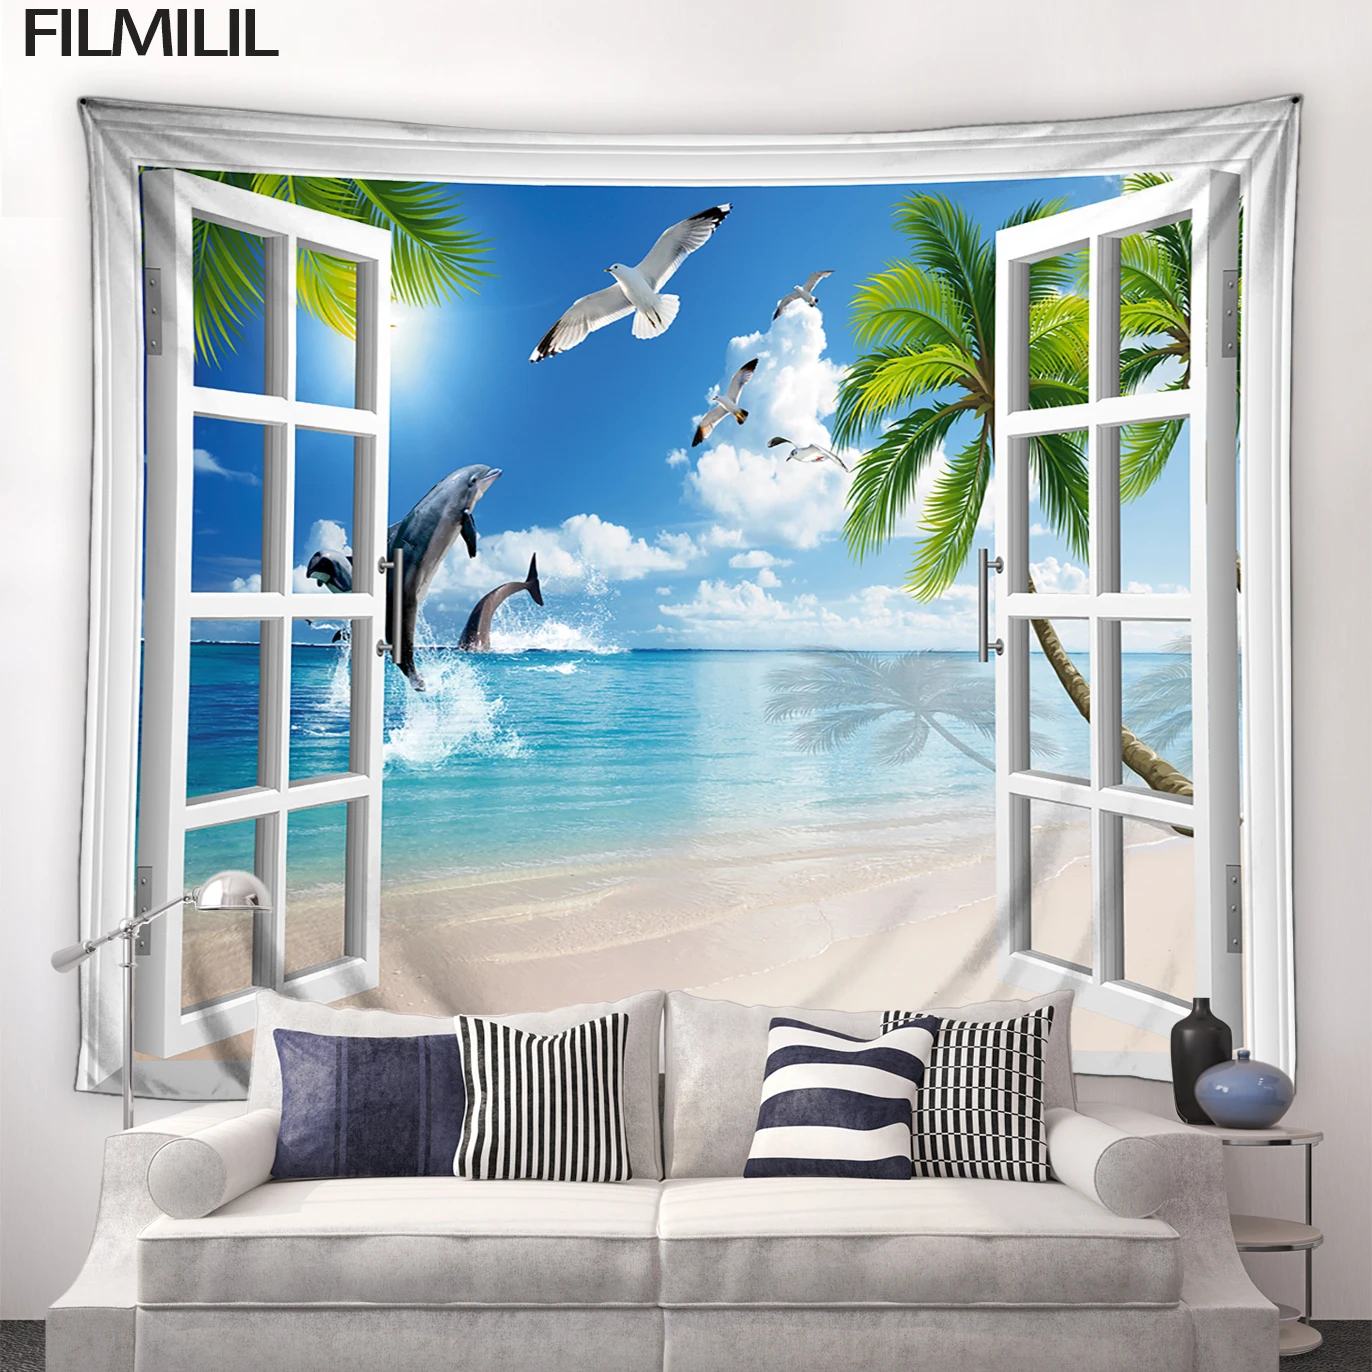 

Outside Window Ocean Landscape Tapestry Tropical Green Palm Tree Dolphin Bird Natural Scenery Tapestries Home Decor Wall Hanging